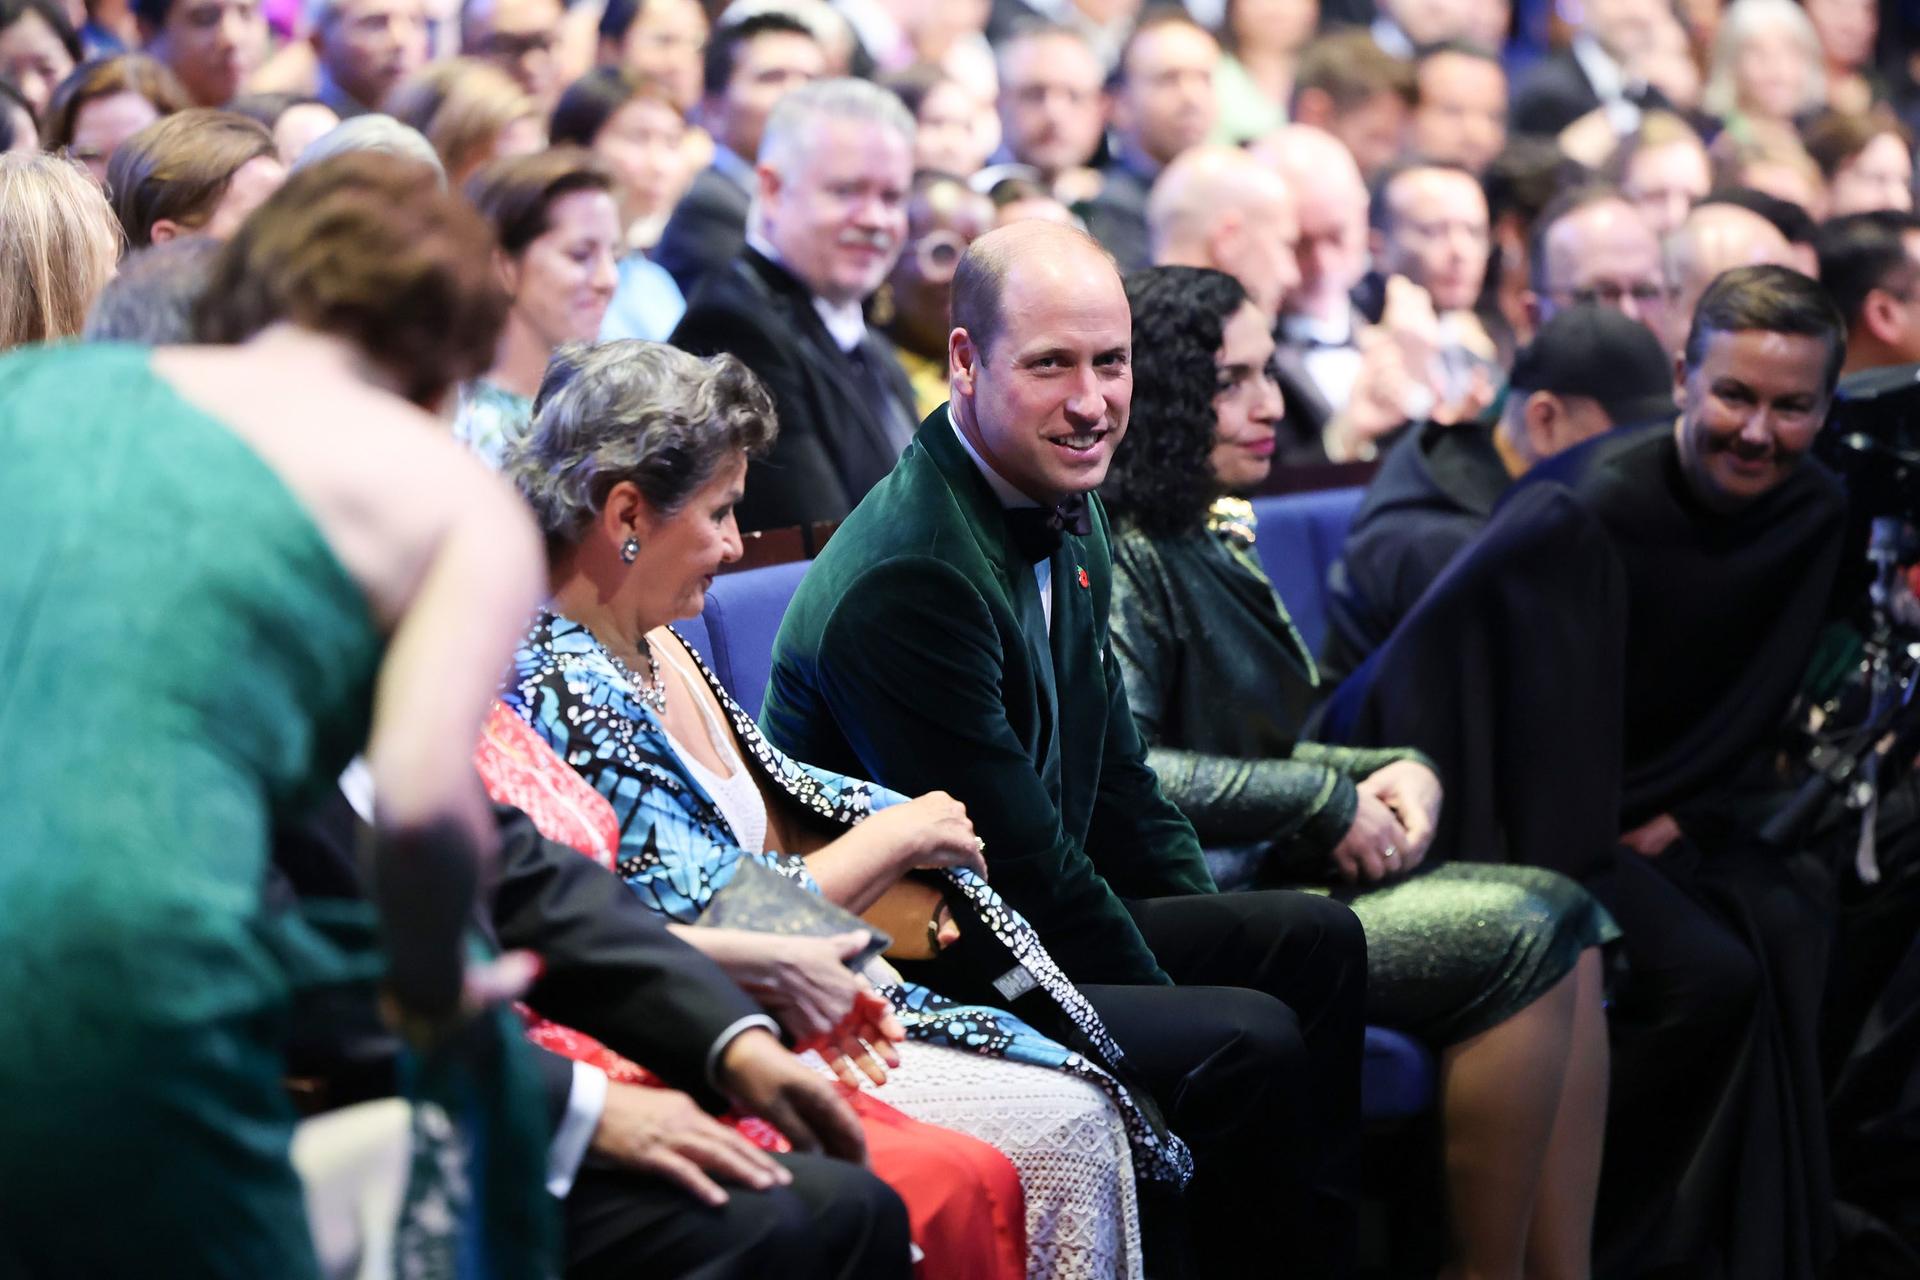 Prince William shows off his green credentials, dressing sustainably by reusing a green velvet blazer that he previously wore at the inaugural Earthshot Prize awards ceremony in London in 2021.